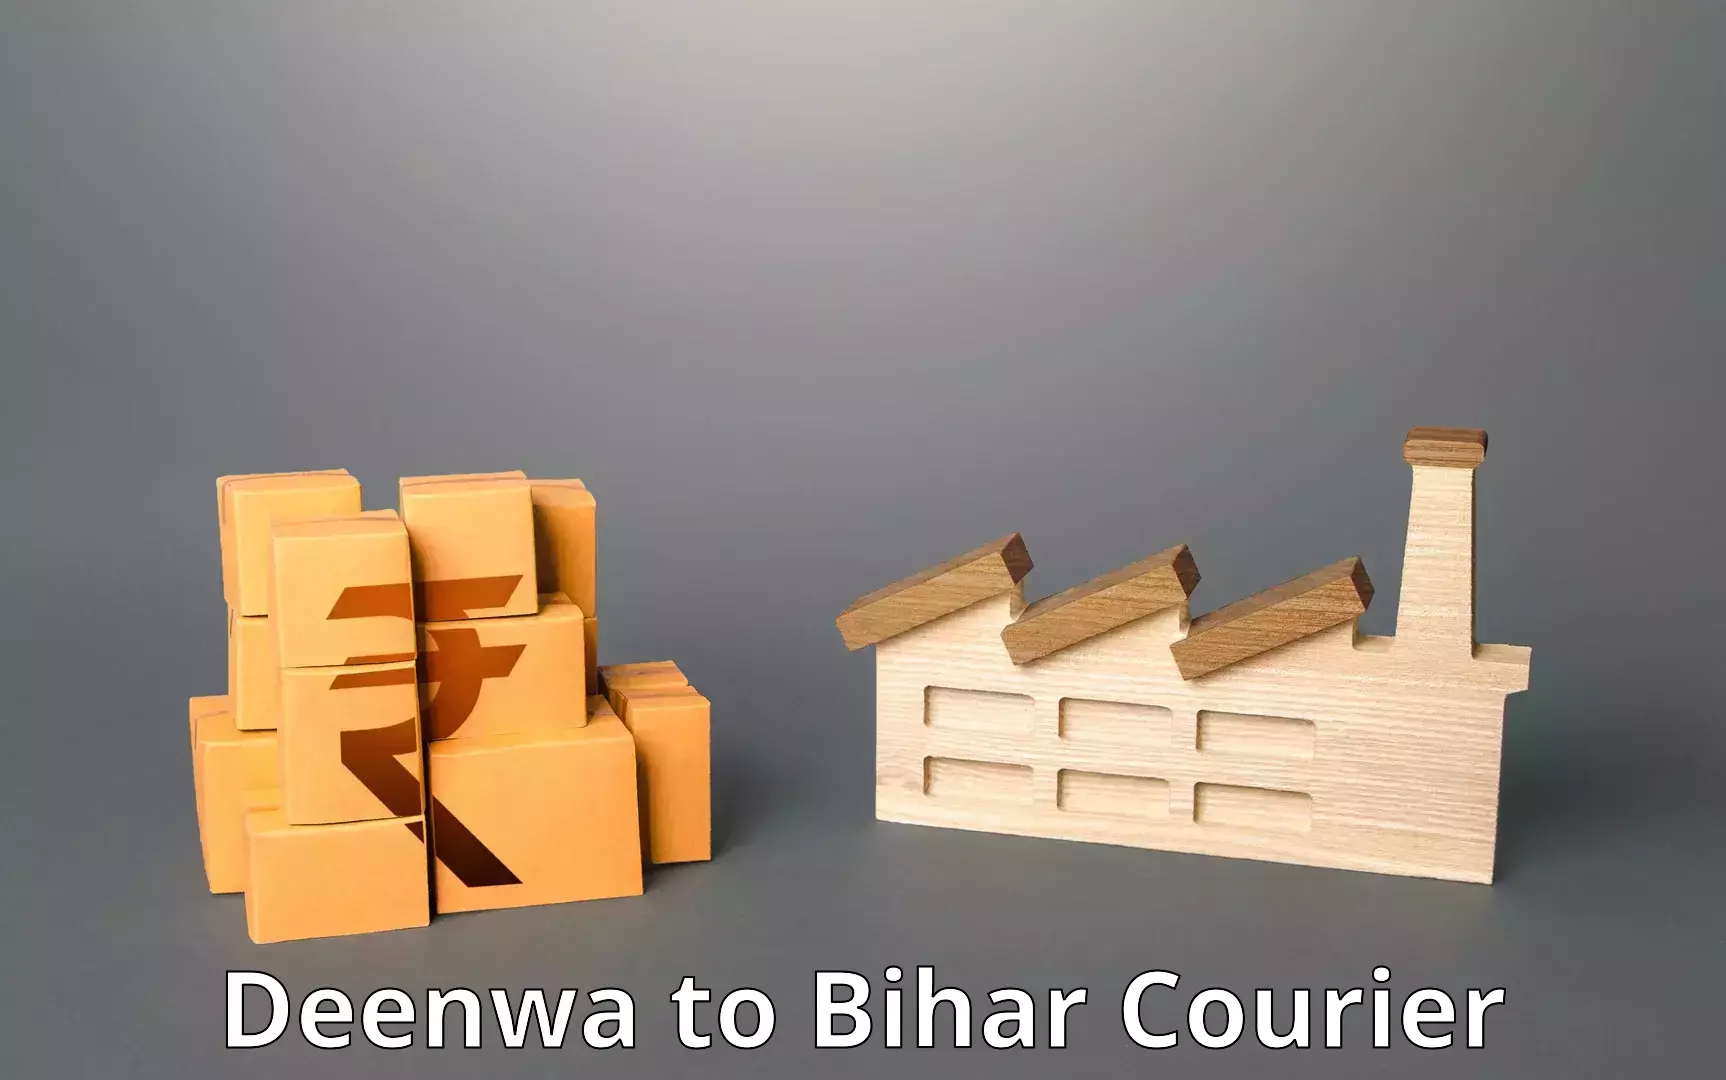 Express delivery solutions Deenwa to Bihar